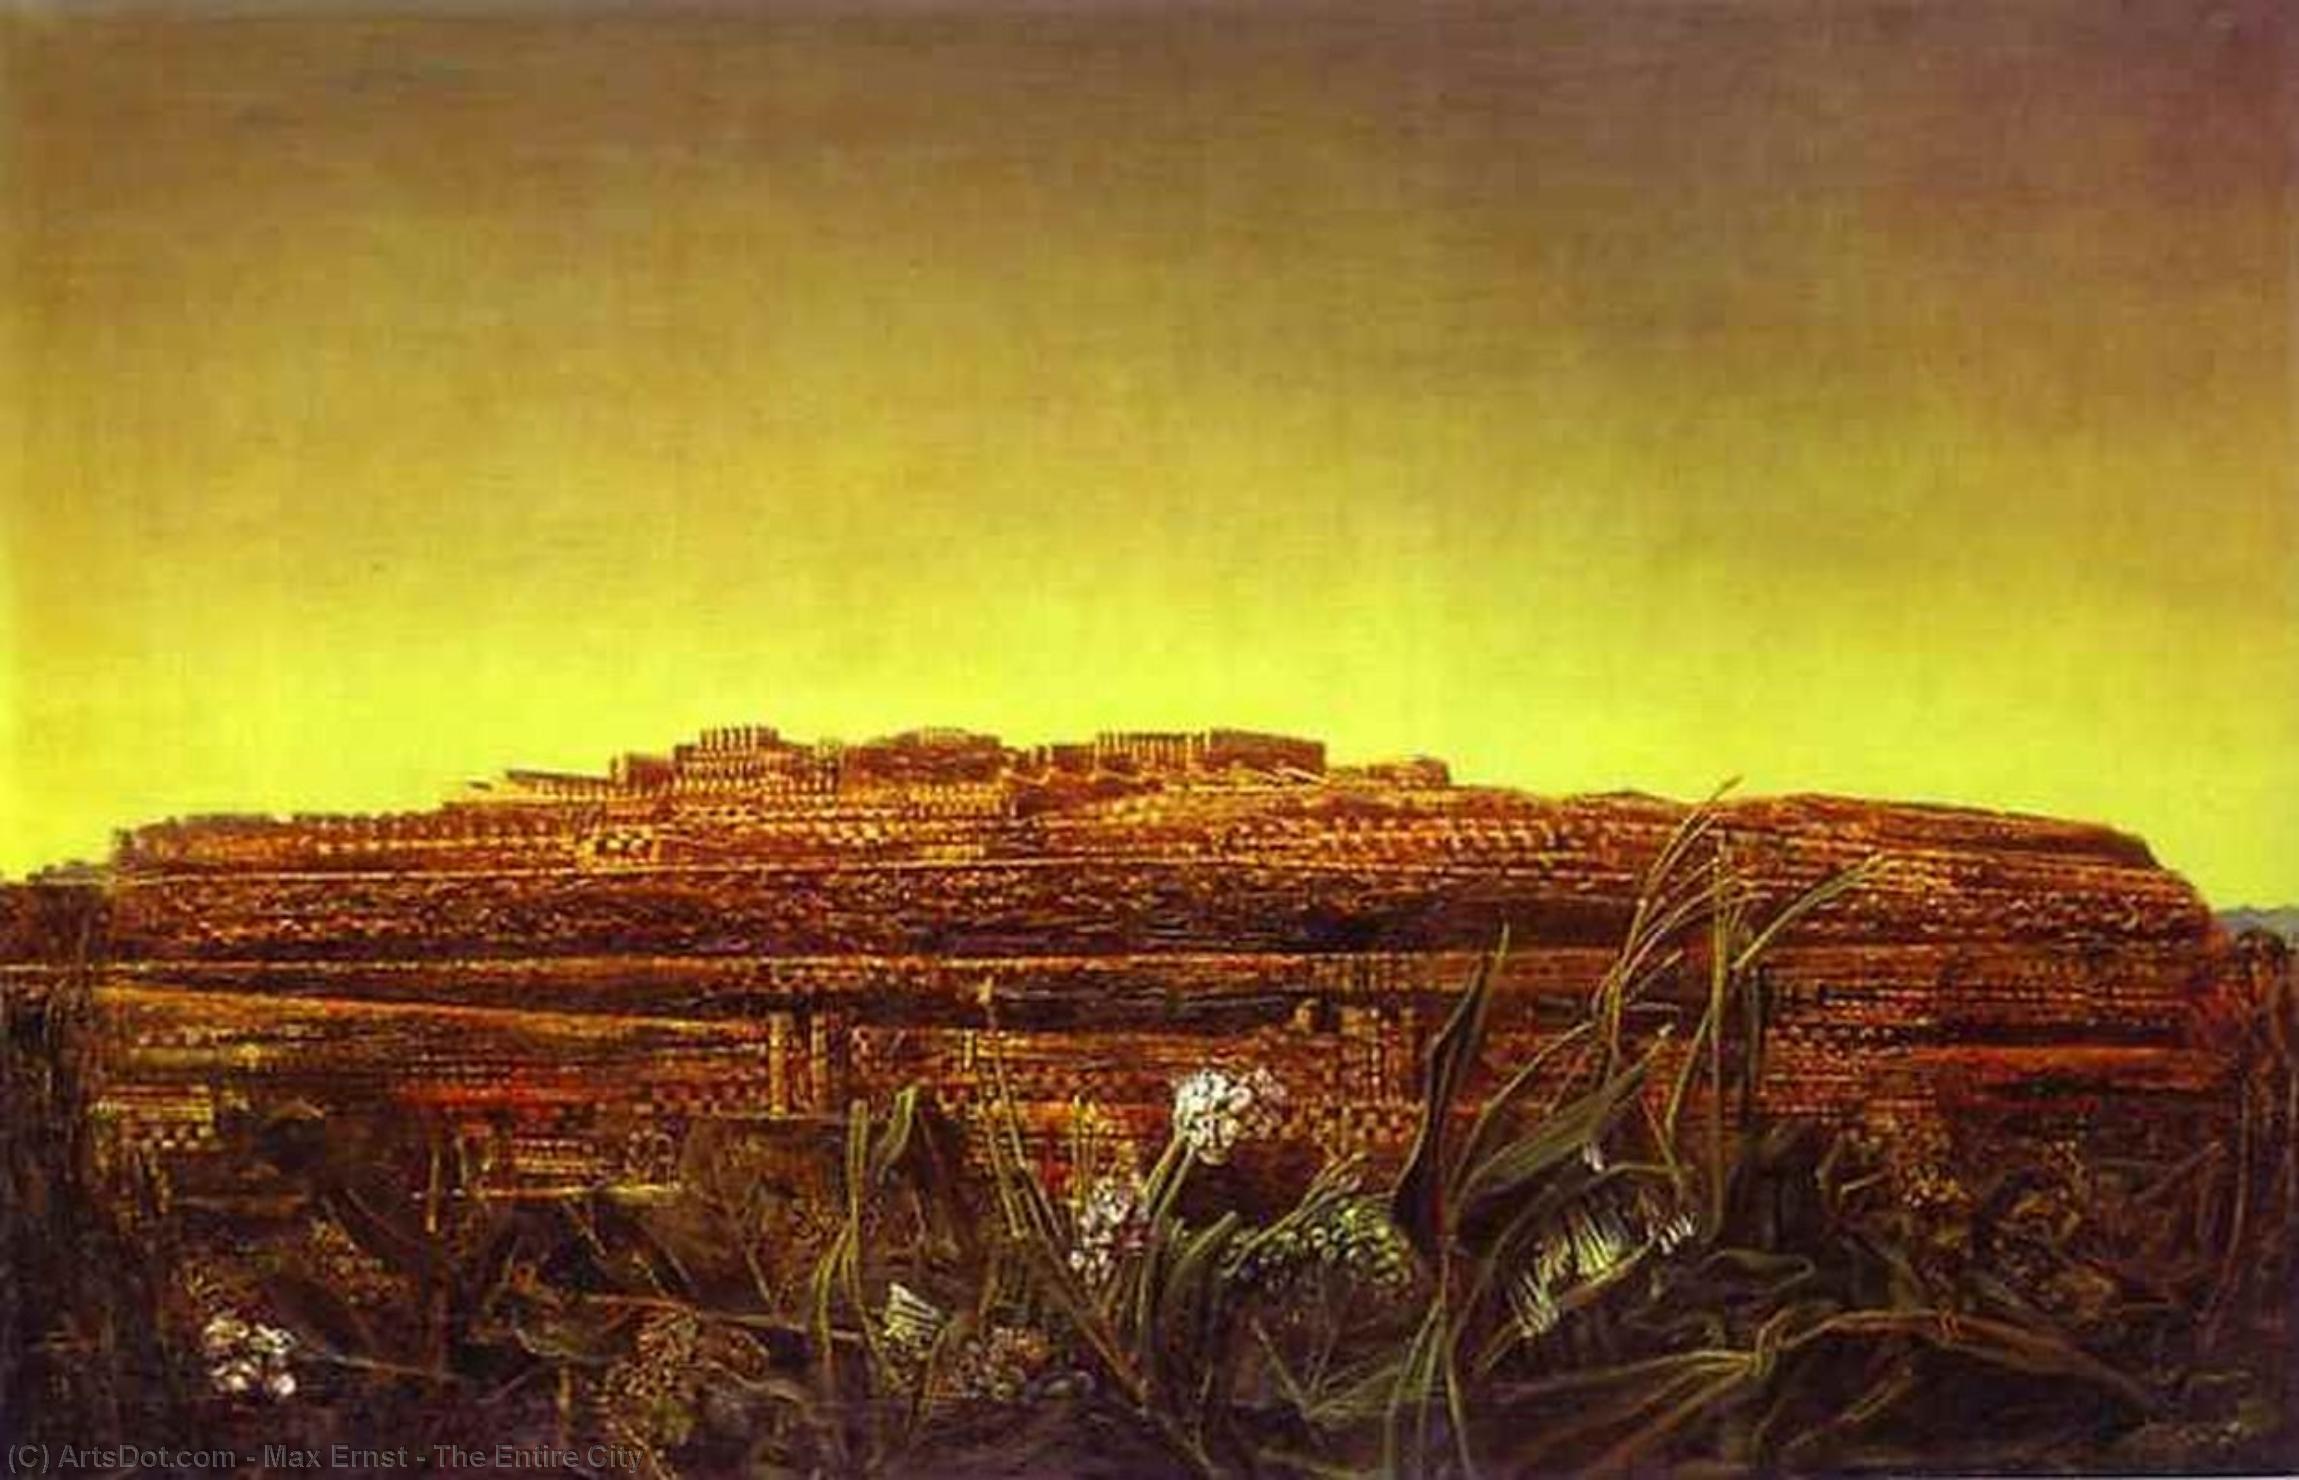 WikiOO.org - Encyclopedia of Fine Arts - Lukisan, Artwork Max Ernst - The Entire City